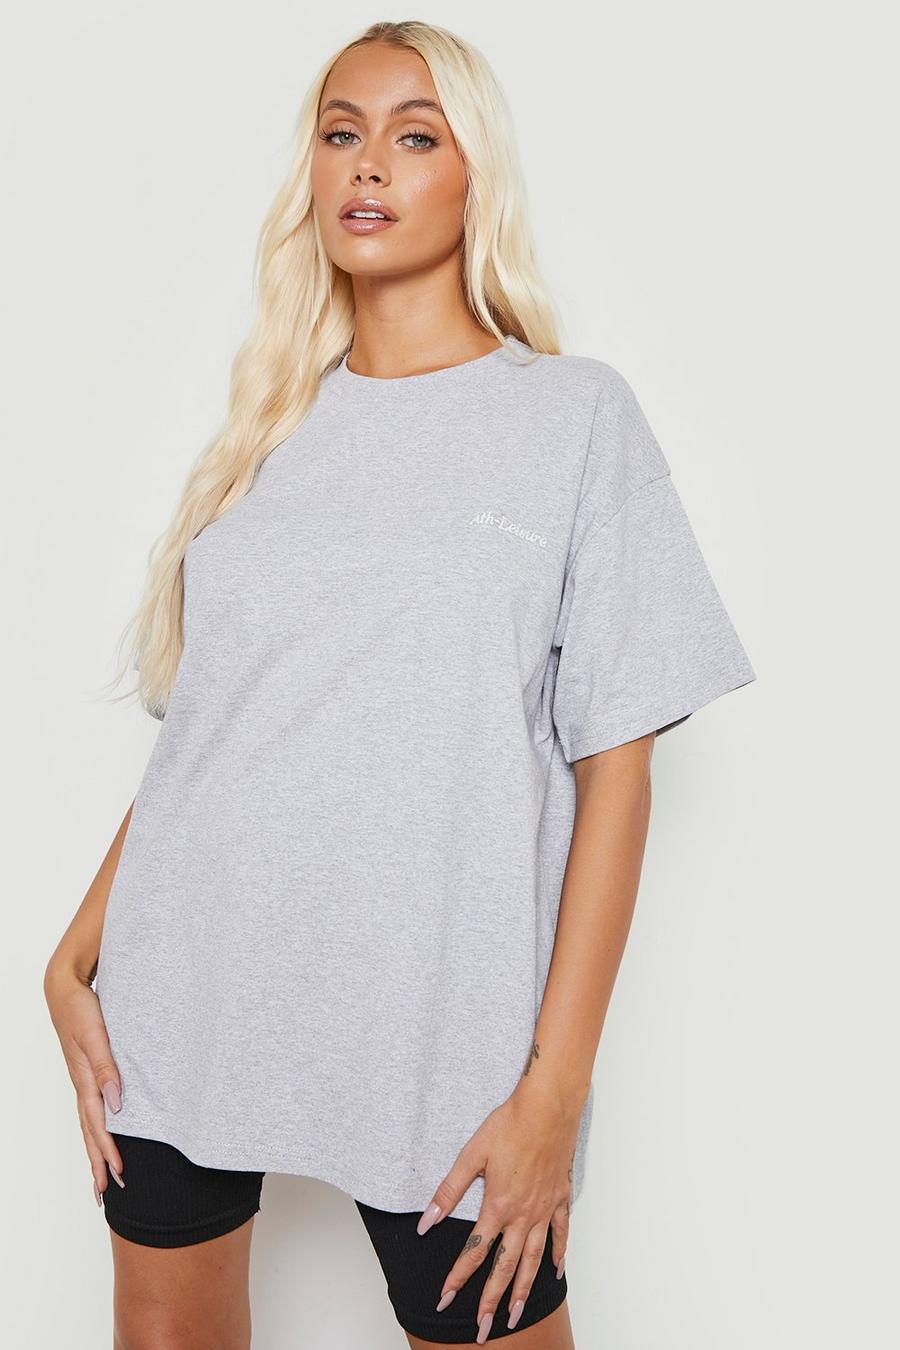 Grey marl Ath-leisure Embroidered Oversized T-shirt